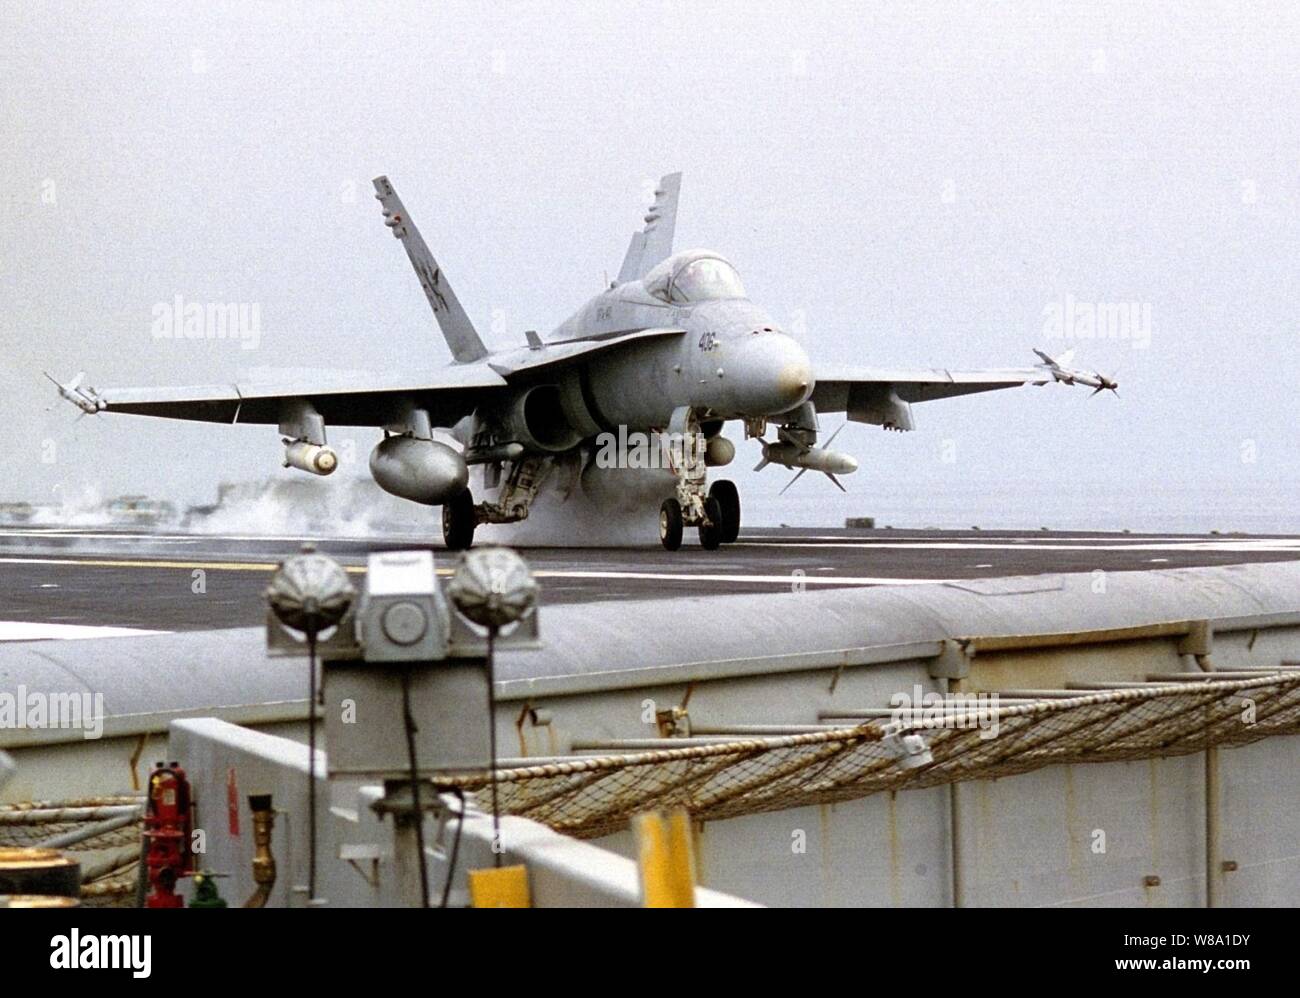 An F/A-18C Hornet launches from the waist catapult during flight operations on board the aircraft carrier USS Nimitz (CVN 68) in the Persian Gulf on Nov. 11, 1997.  The Nimitz and embarked Carrier Air Wing 9 are operating in the Persian Gulf in support of the U.S. and coalition enforcement of the no-fly-zone over Southern Iraq.  The Hornet is armed with AIM-9 Sidewinder heat-seeking, short-range air-to-air missiles, RIM-7M Sea Sparrow radar-guided air-to-air missiles, Rockeye cluster bombs, and the AGM-88 High Speed Anti-Radiation missile (HARM), used as an air-to-ground weapon to seek out and Stock Photo